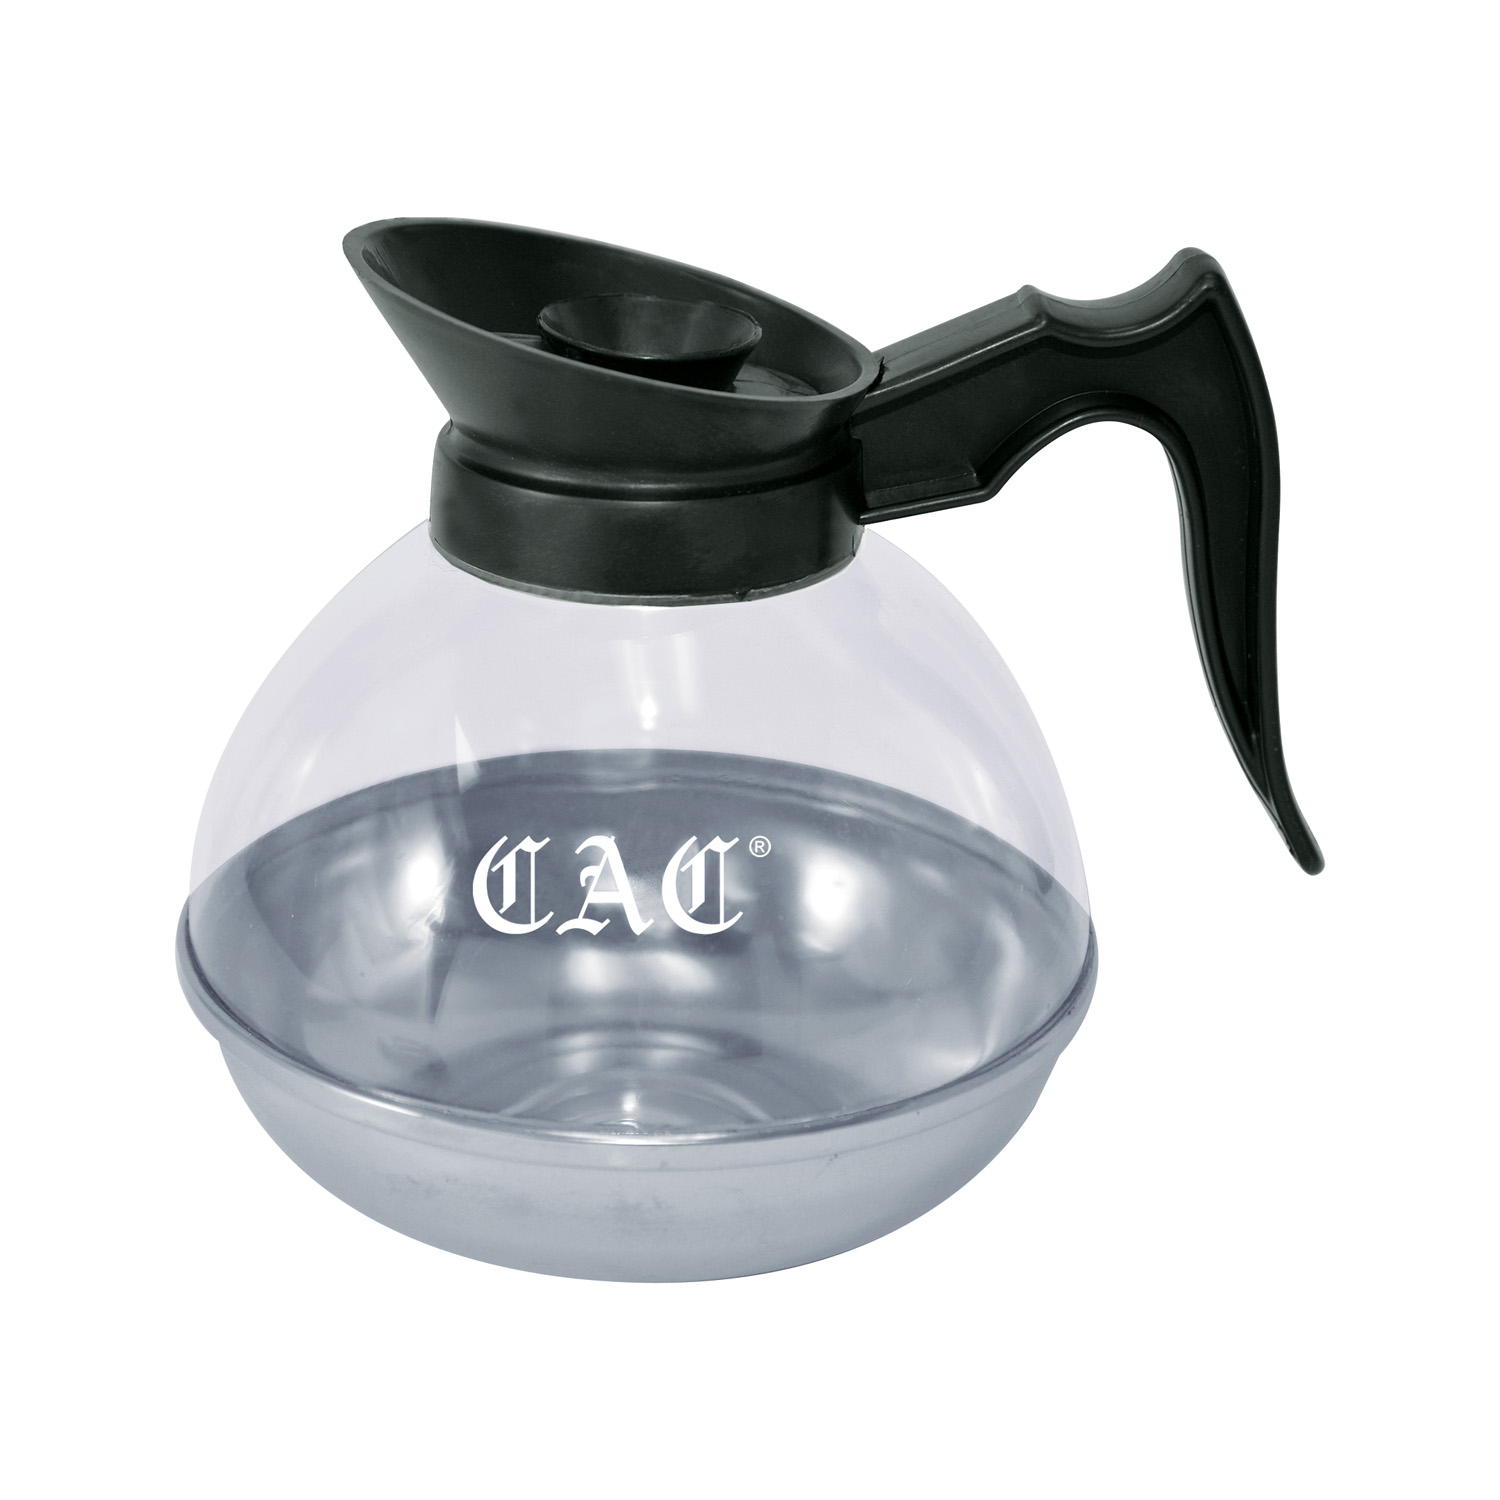 CAC China BVCD-64K Black Coffee Decanter with Stainless Steel Base 64 oz., 